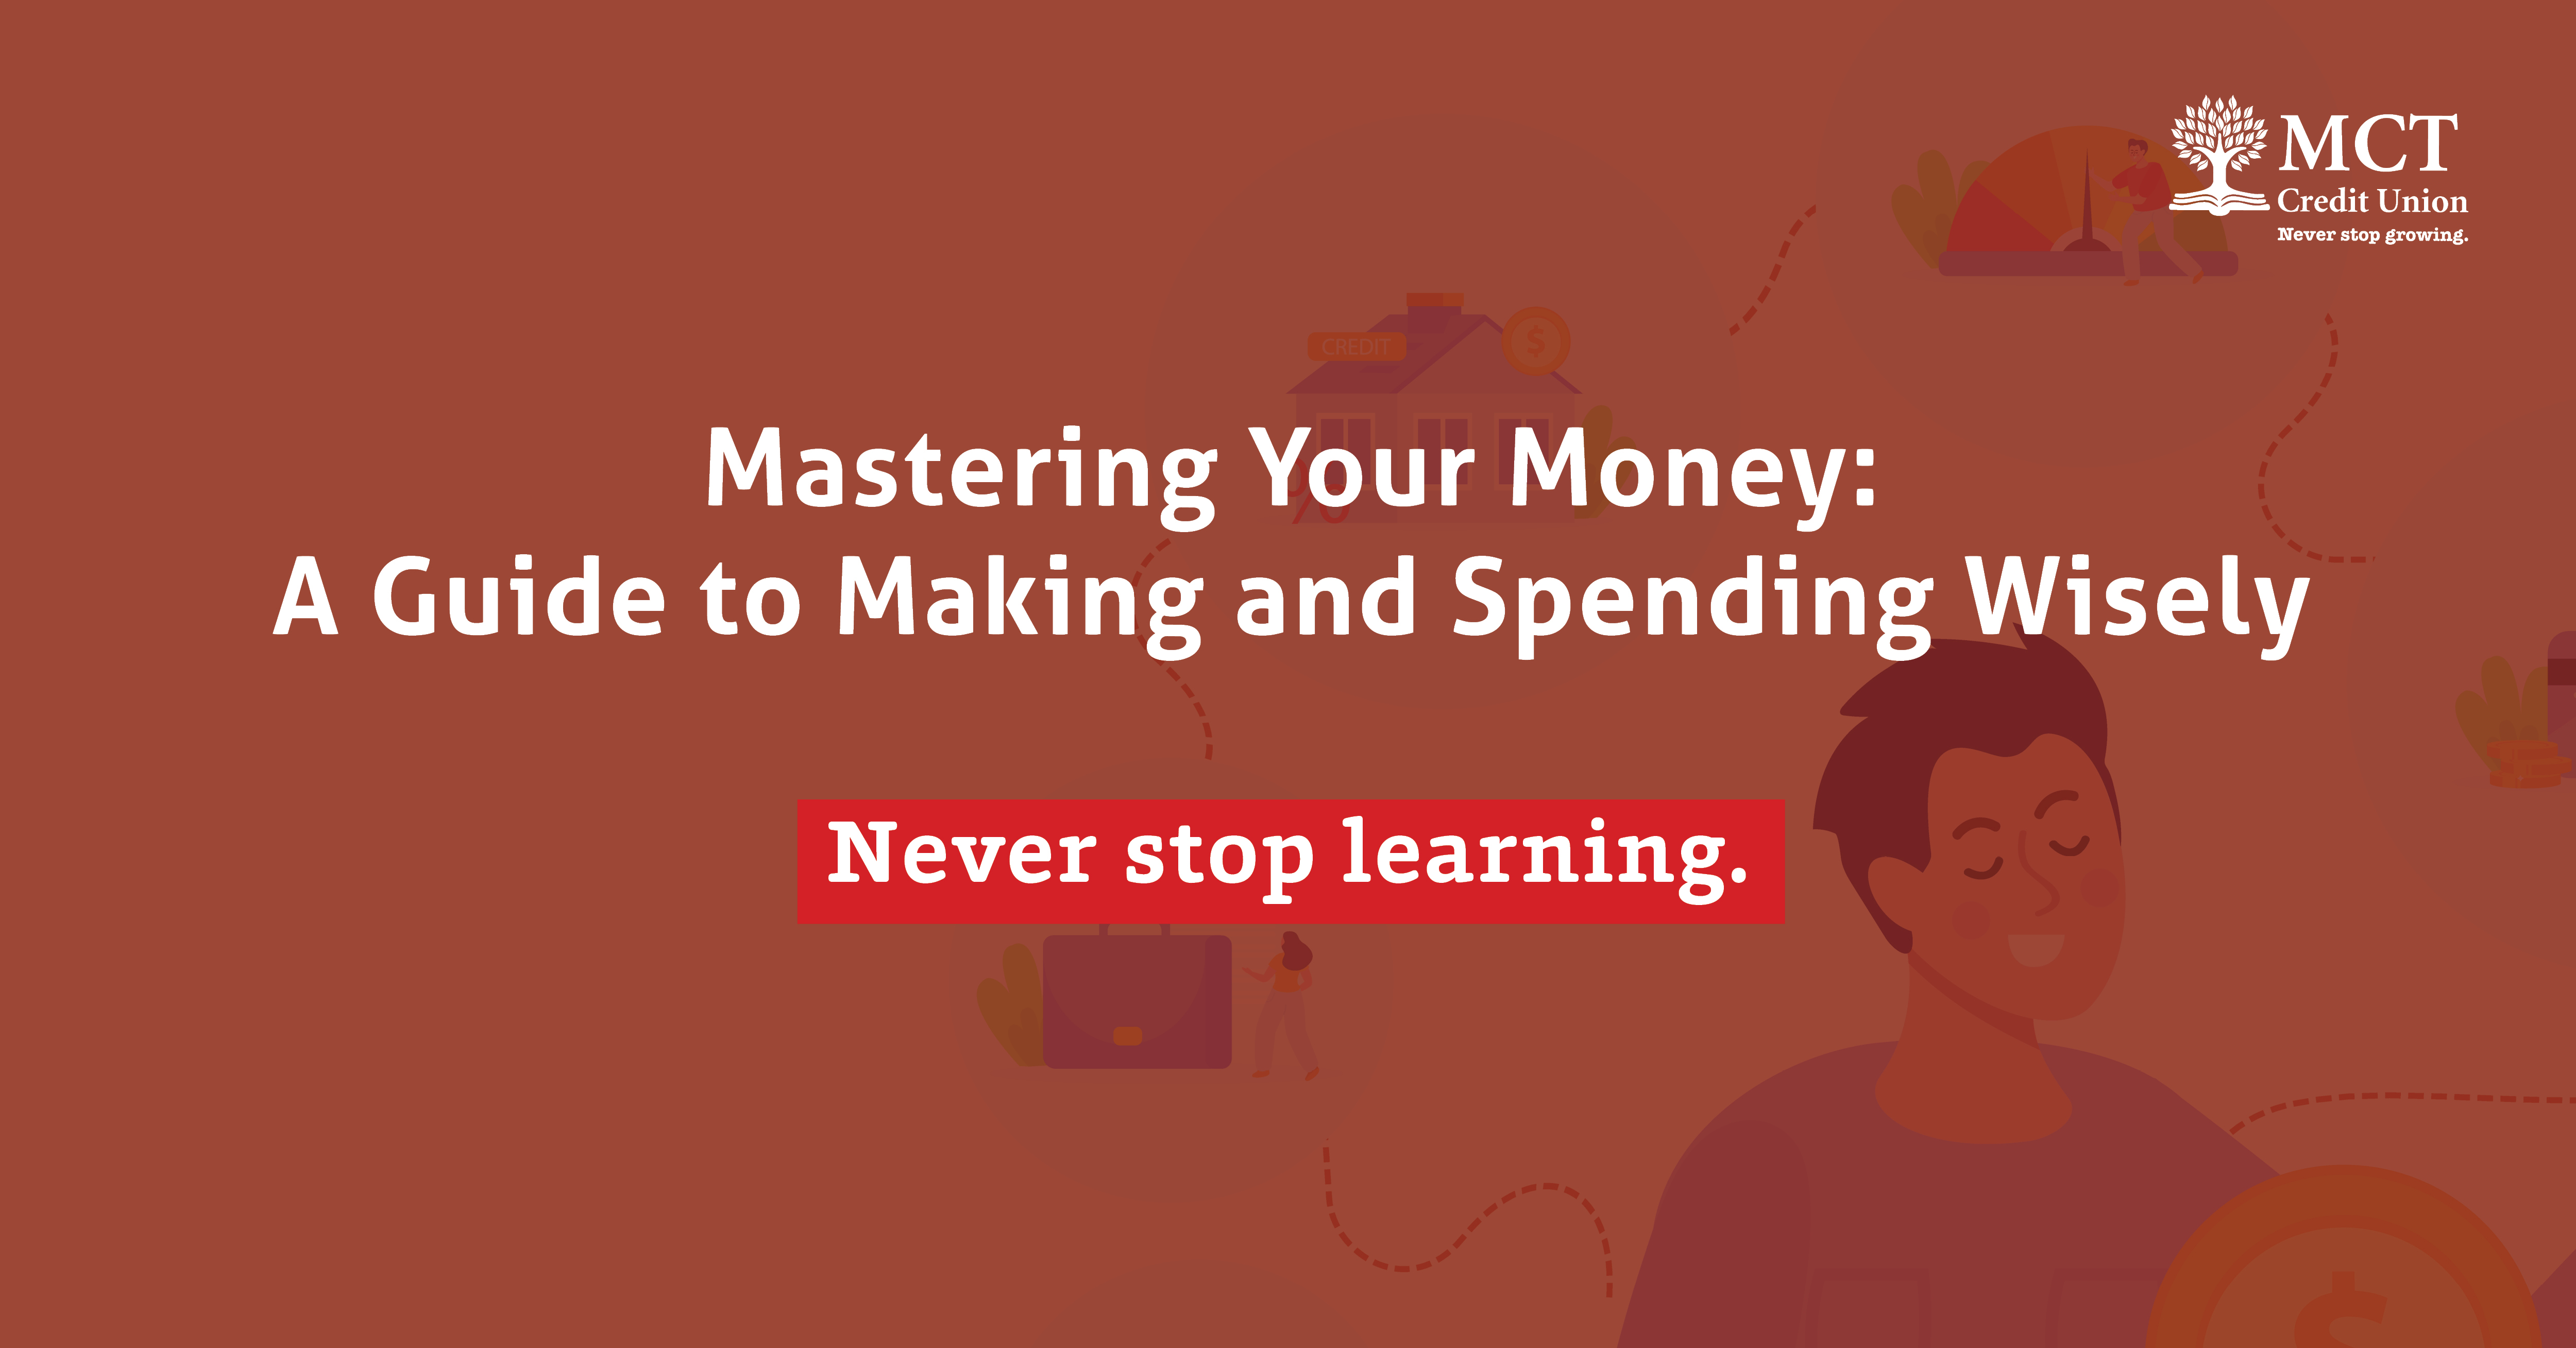 Mastering Your Money: A Guide to Making and Spending Wisely